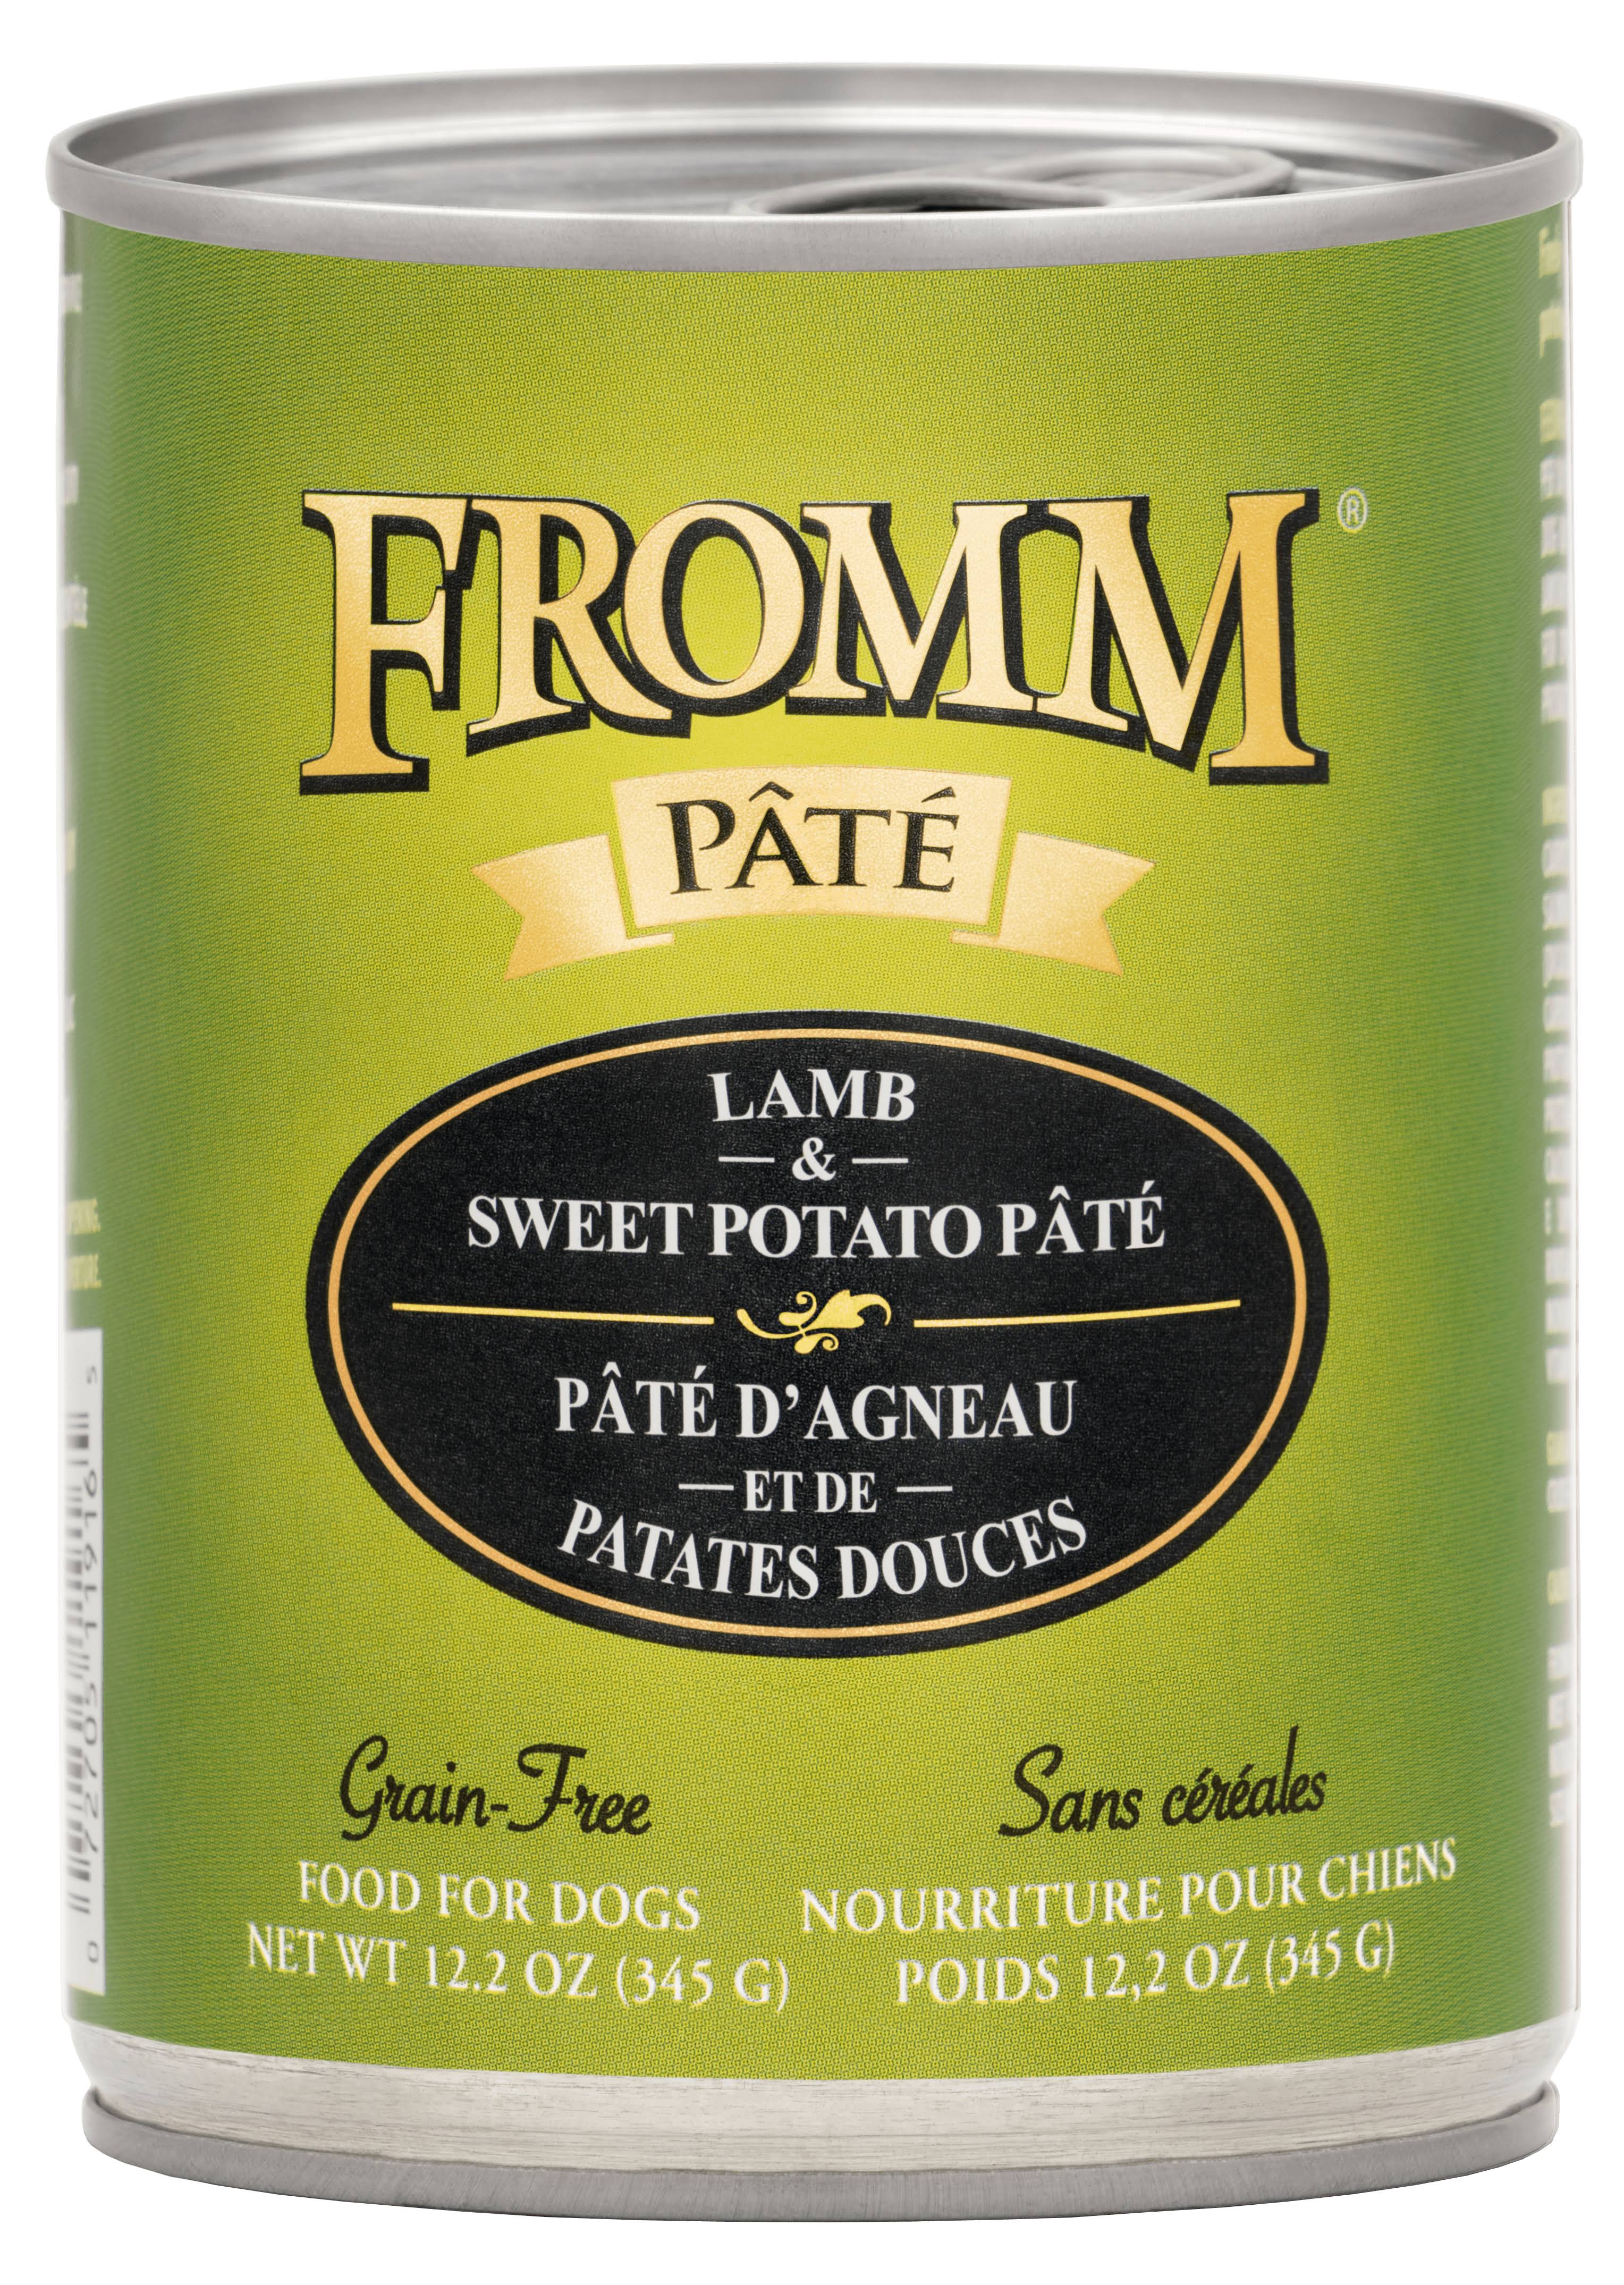 Fromm Lamb & Sweet Potato Pate Canned Dog Food, 12.2-oz, Case of 12